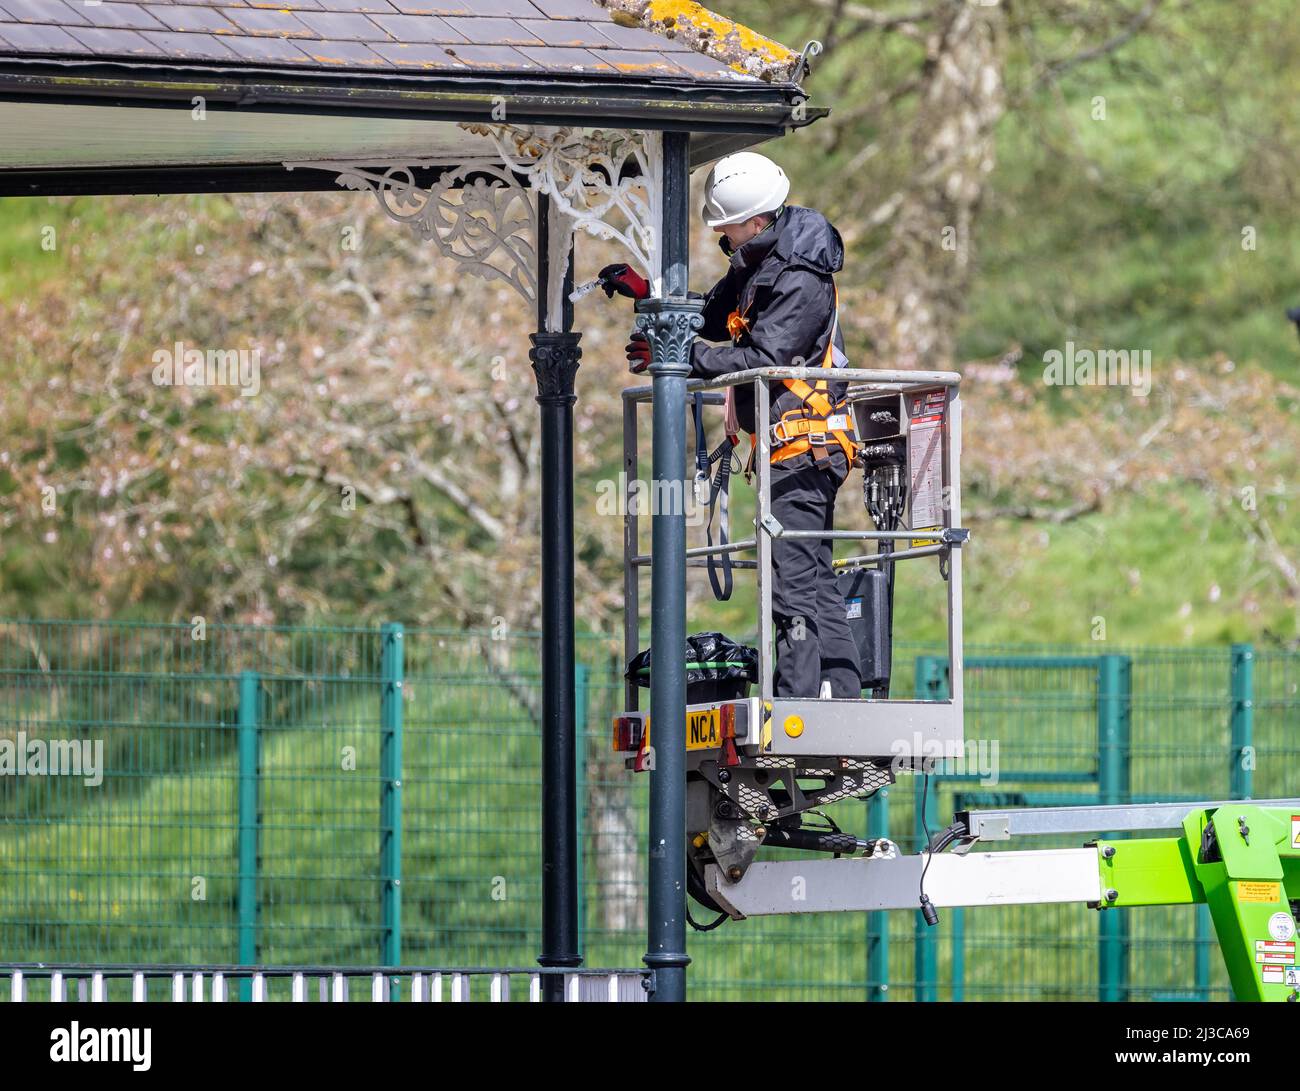 Workman on cherry picker with safety harness painting band stand metalwork in Warminster, Wiltshire, UK on 7 April 2022 Stock Photo